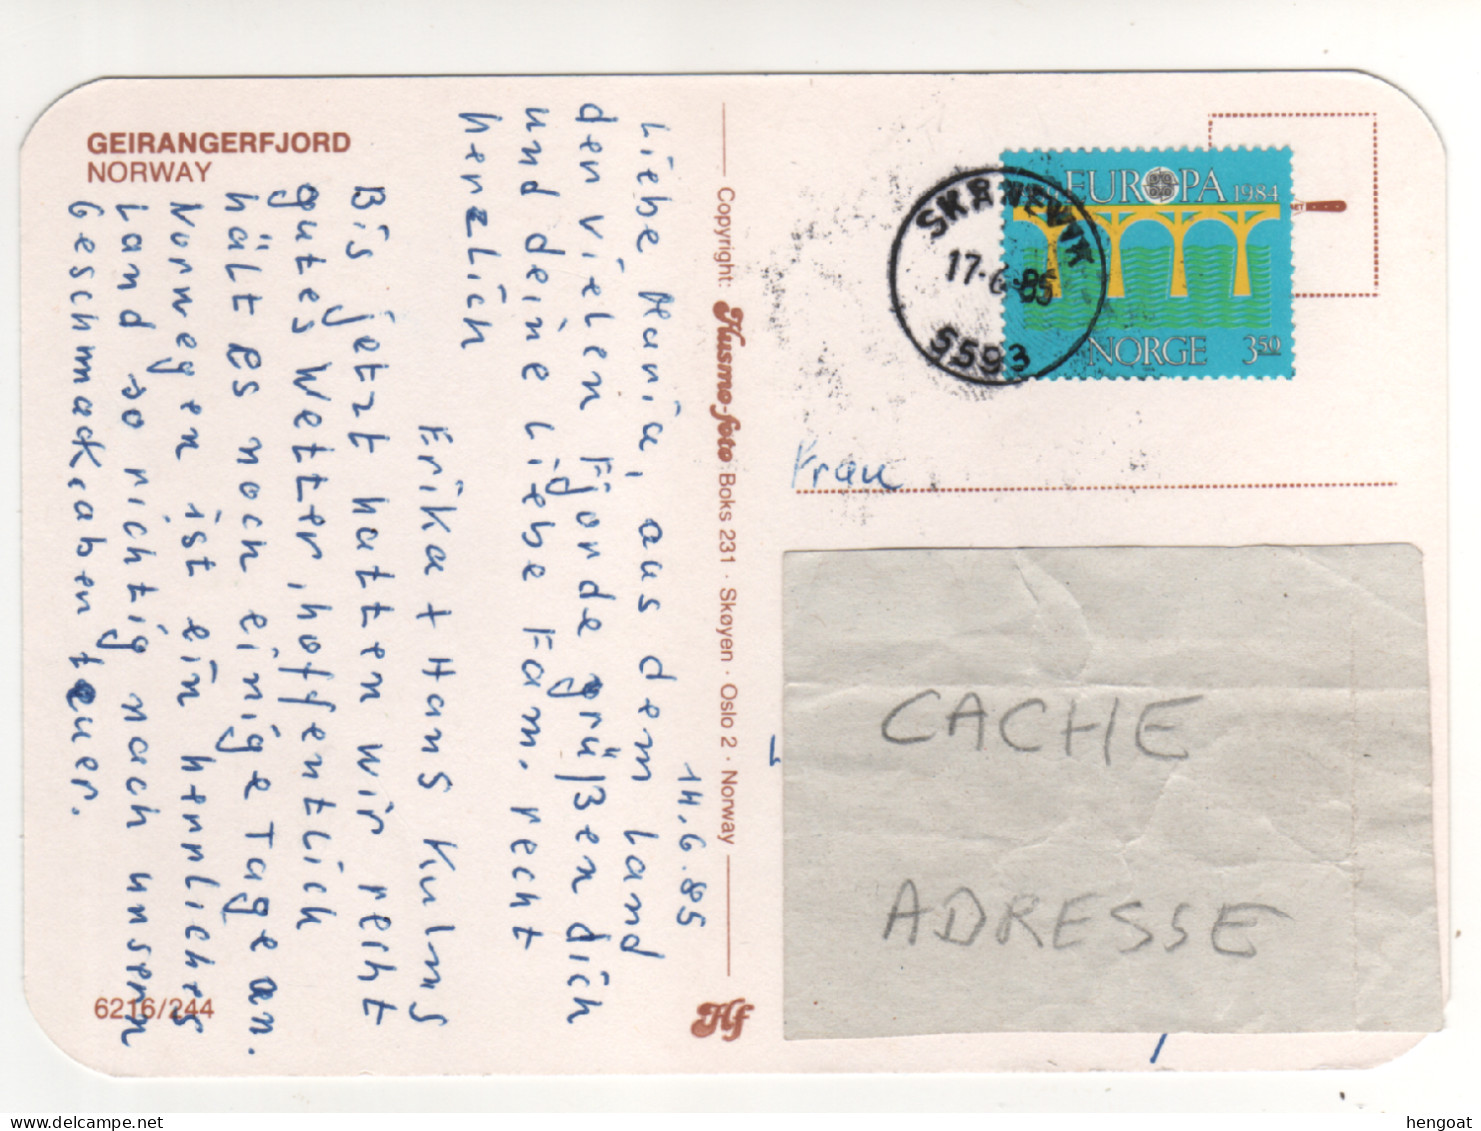 Timbre , Stamp Yvert N° 861 " EUROPA " Sur CP , Carte , Postcard Du 17/06/85 - Covers & Documents